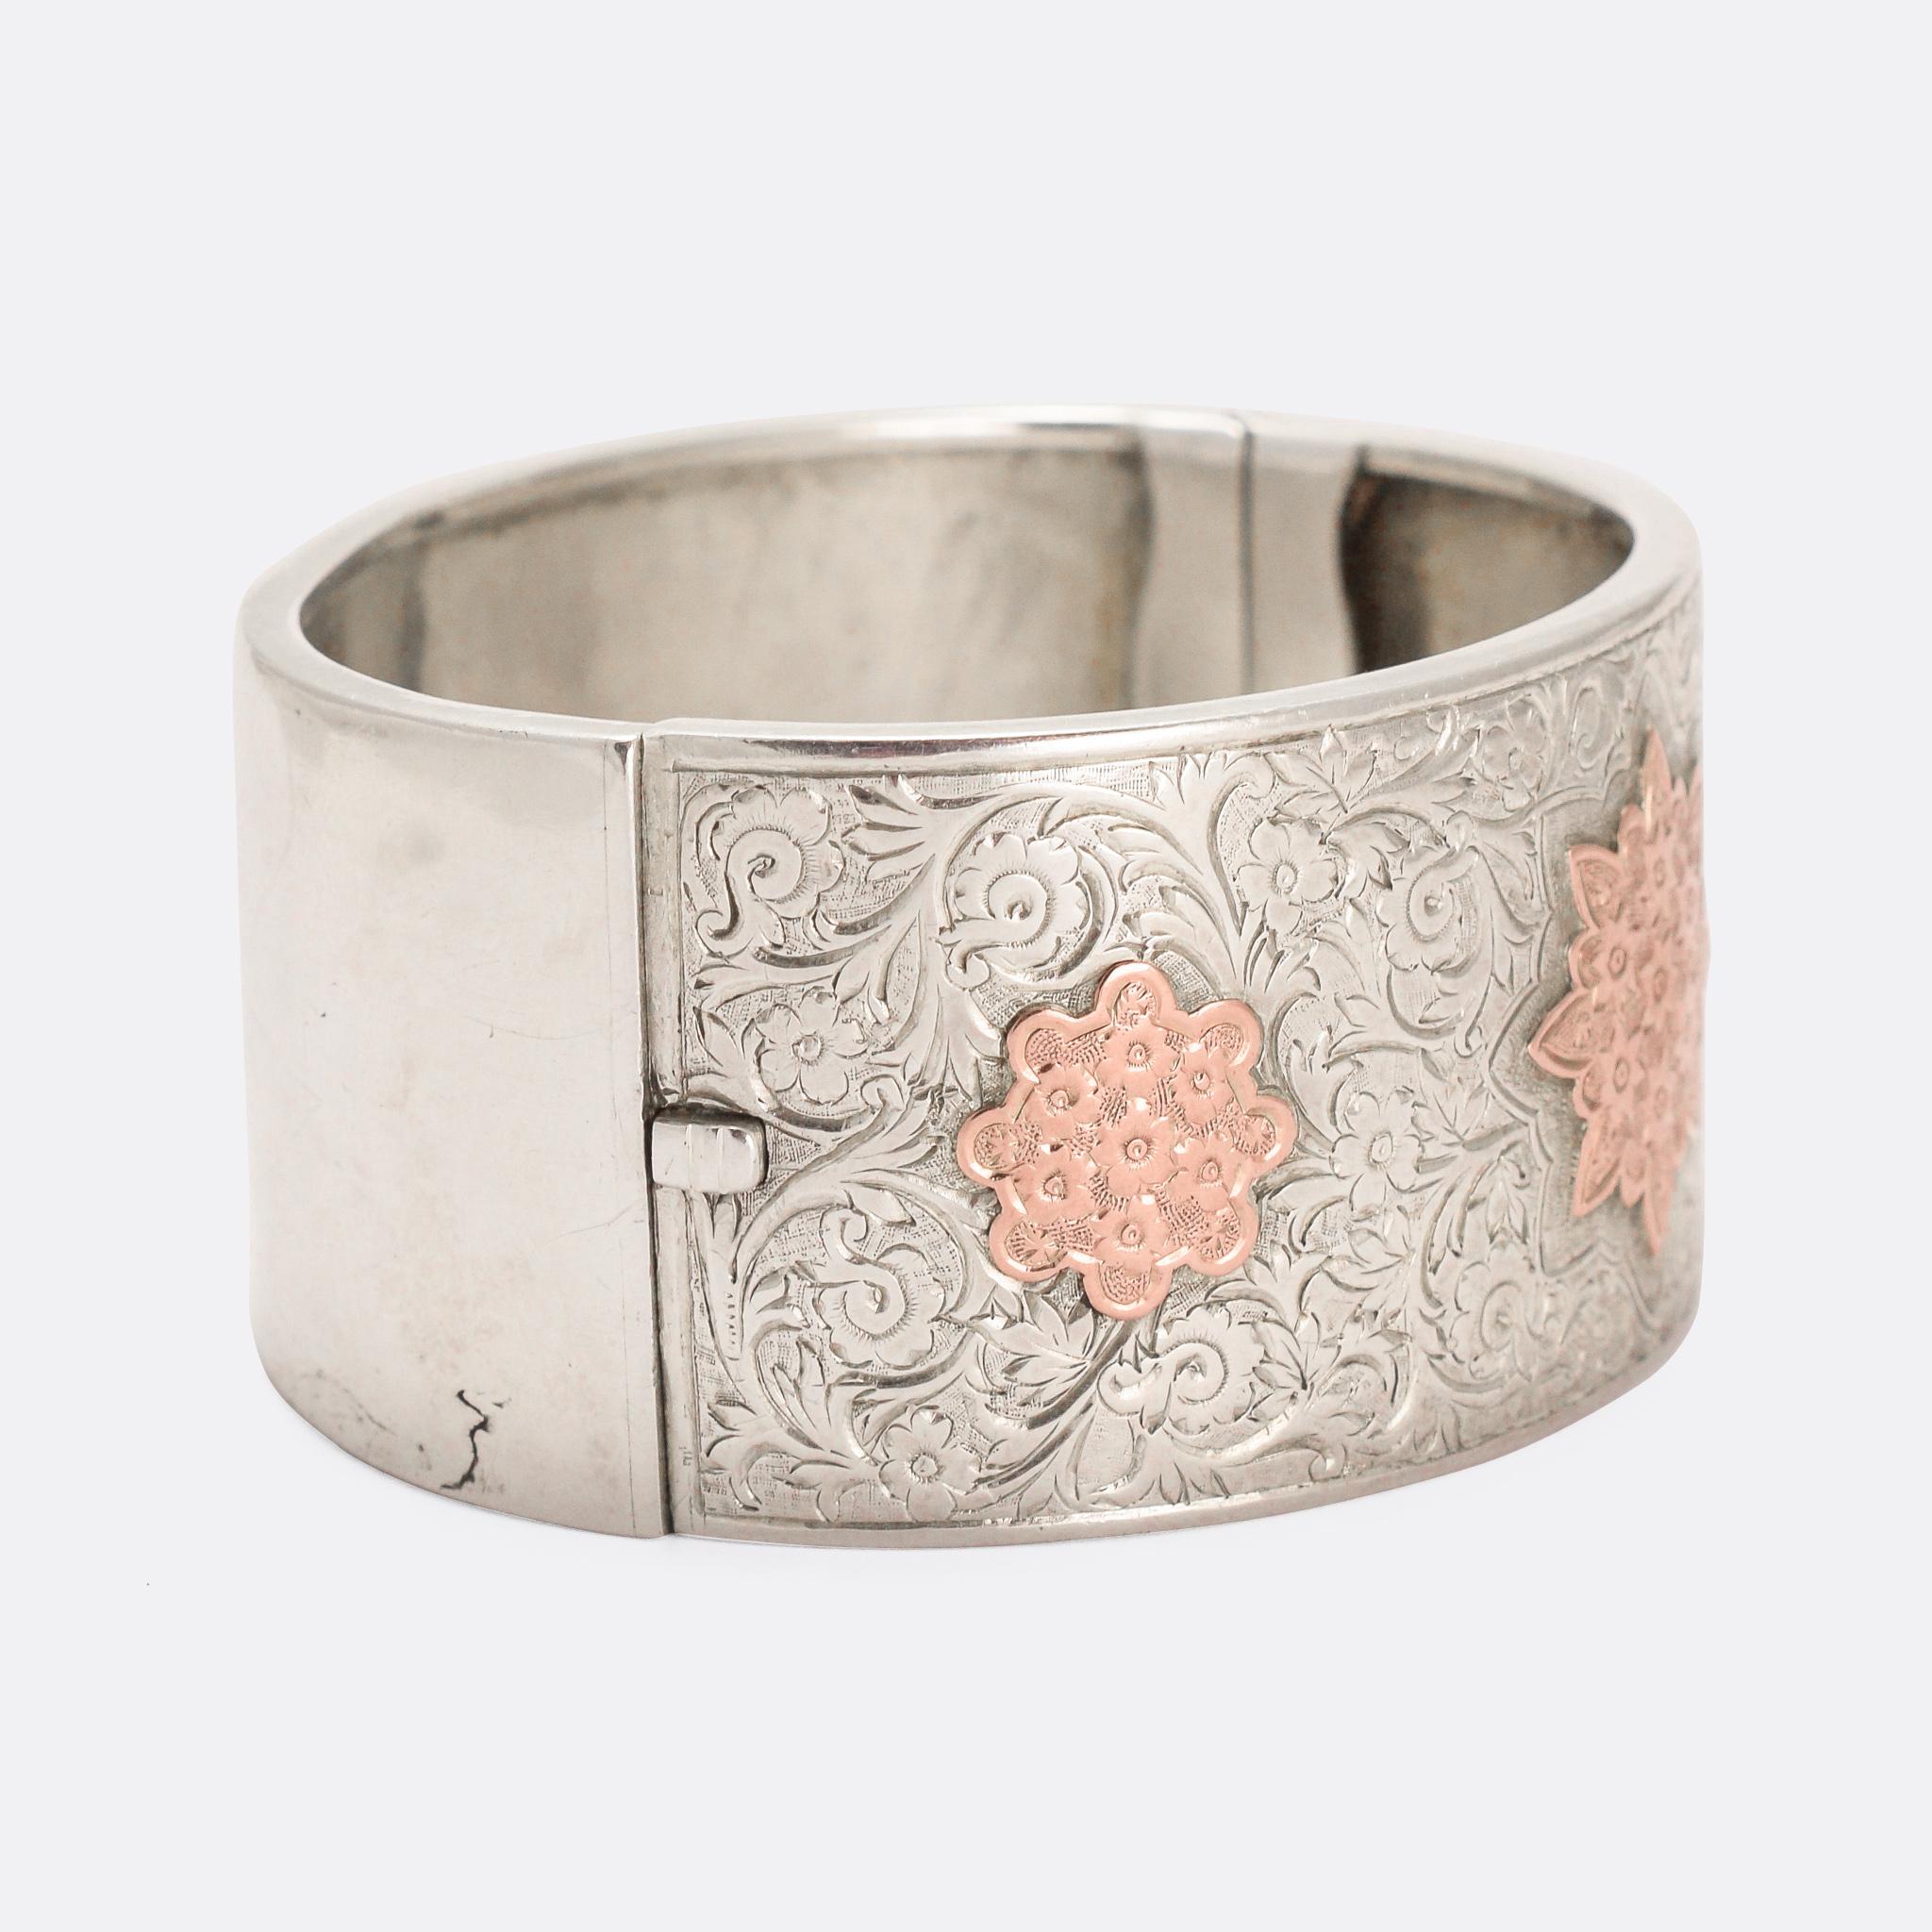 A fine quality antique silver cuff bangle featuring beautiful hand-chased detailing and applied rose gold flower motifs. The two tones of the antique metals complement each other perfectly; it's a particularly good example of this popular style.